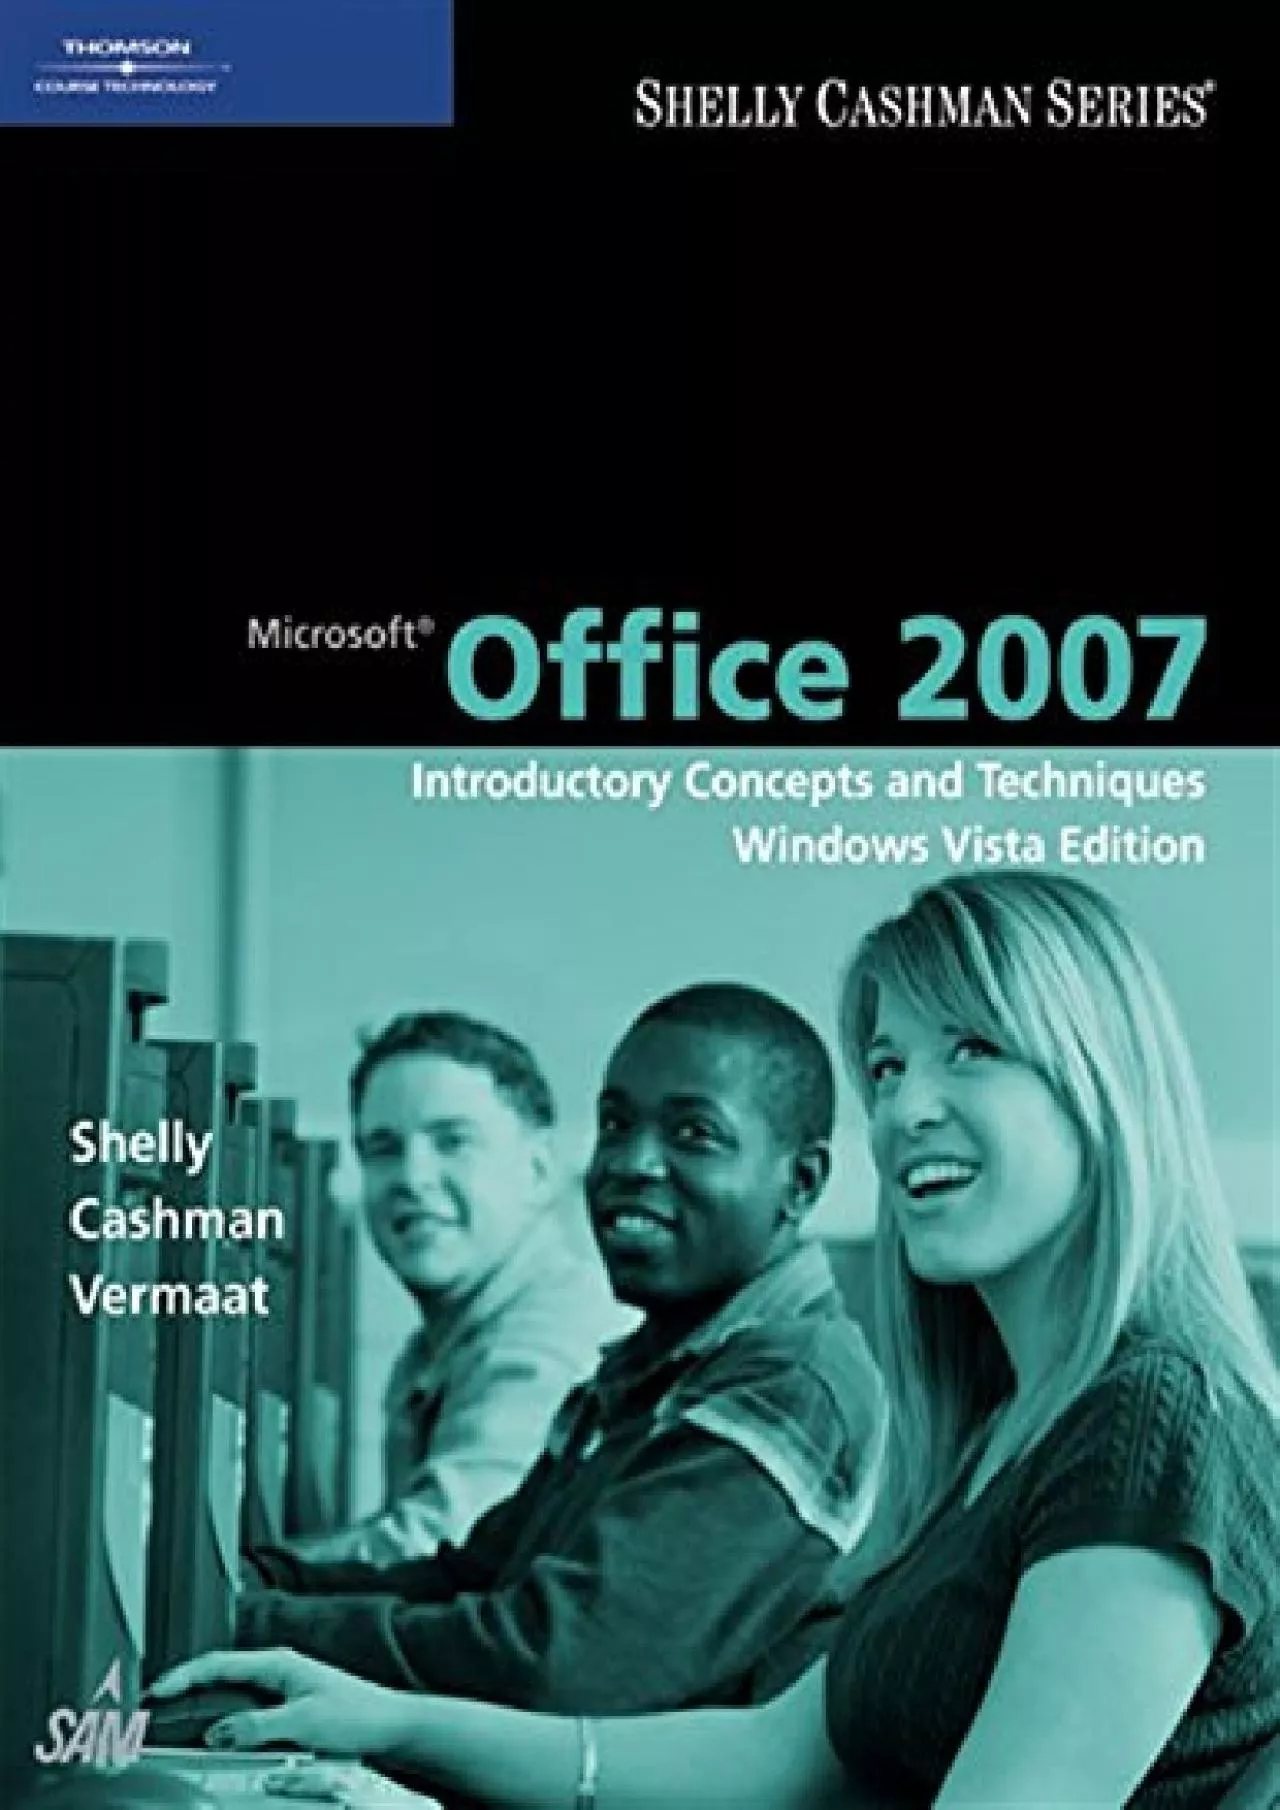 (BOOK)-Microsoft Office 2007: Introductory Concepts and Techniques, Windows Vista Edition